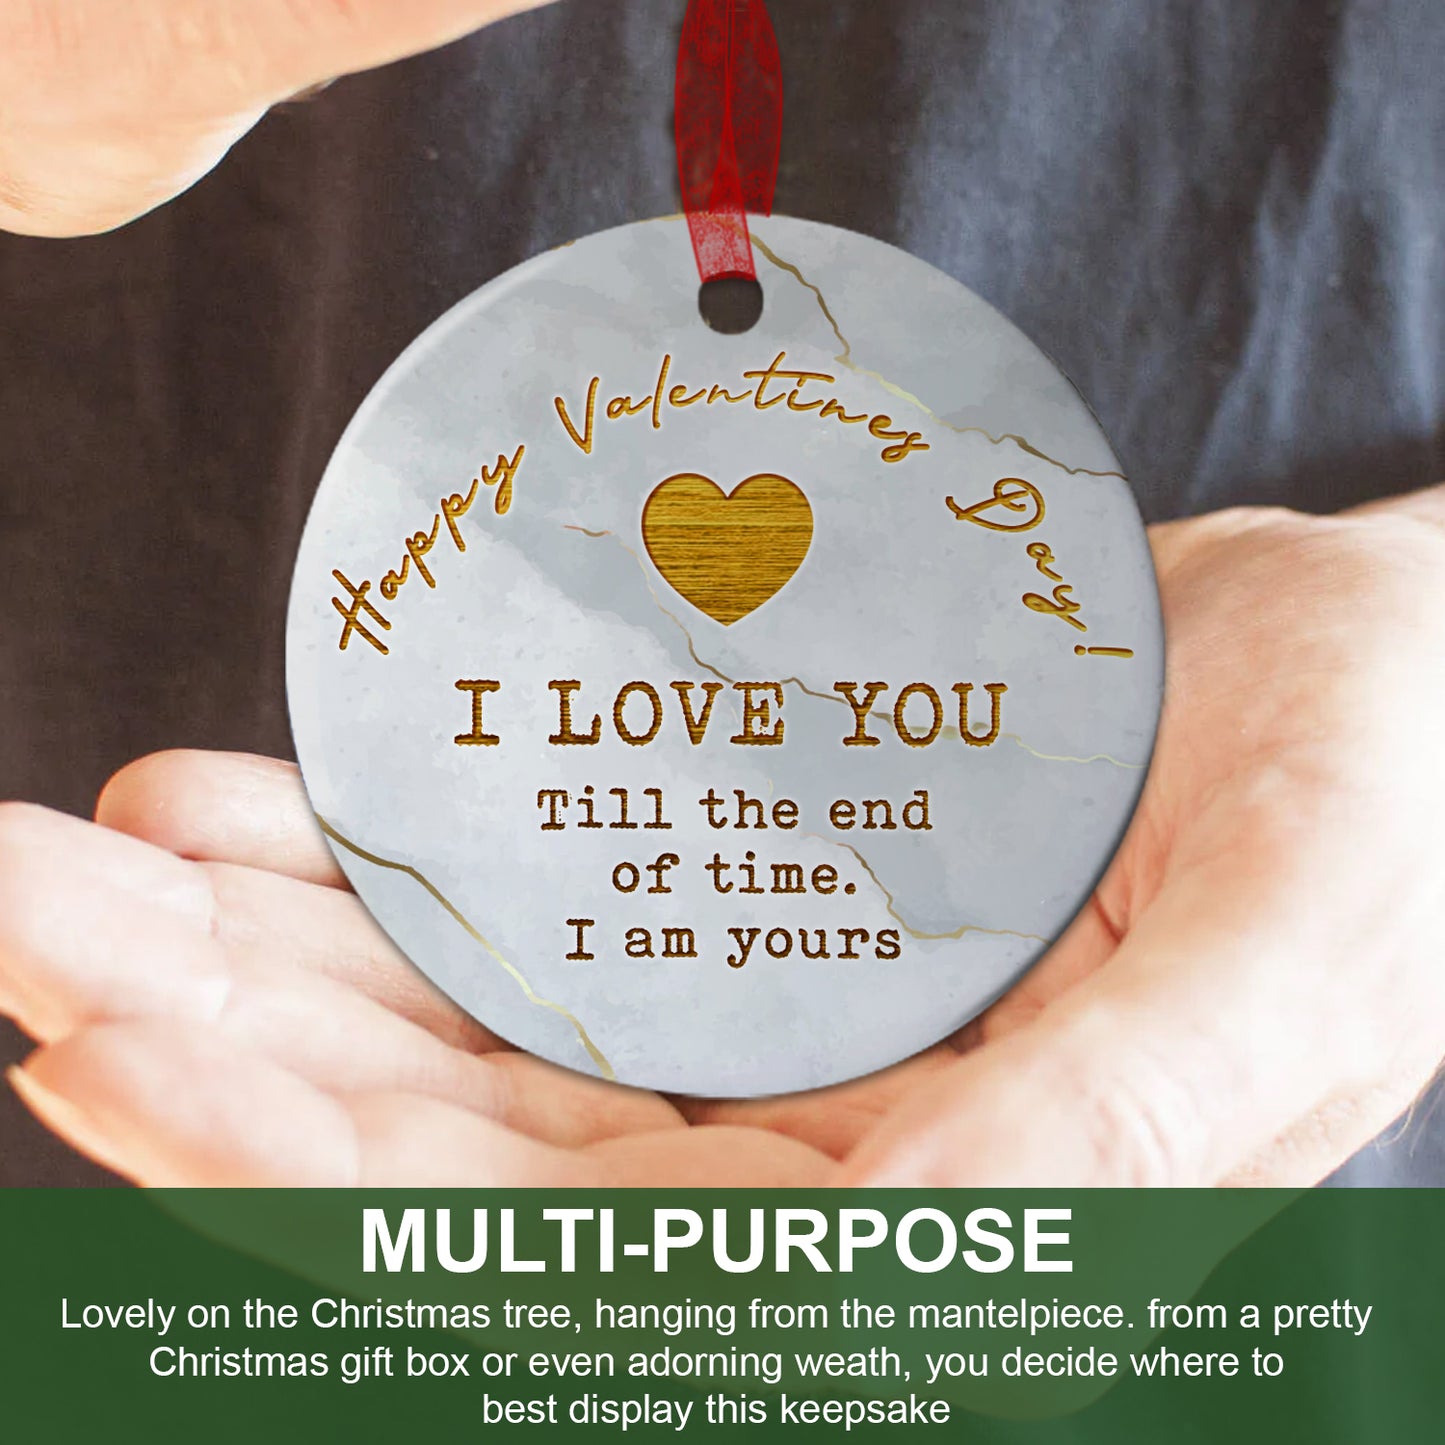 Love Ornament 2023 Happy Valentines Day Ornament- Gifts For Birthday Anniversary- Gift From Wife, Husband - Valentines Gift For Him Her- Aluminum Metal Ornament With Ribbon